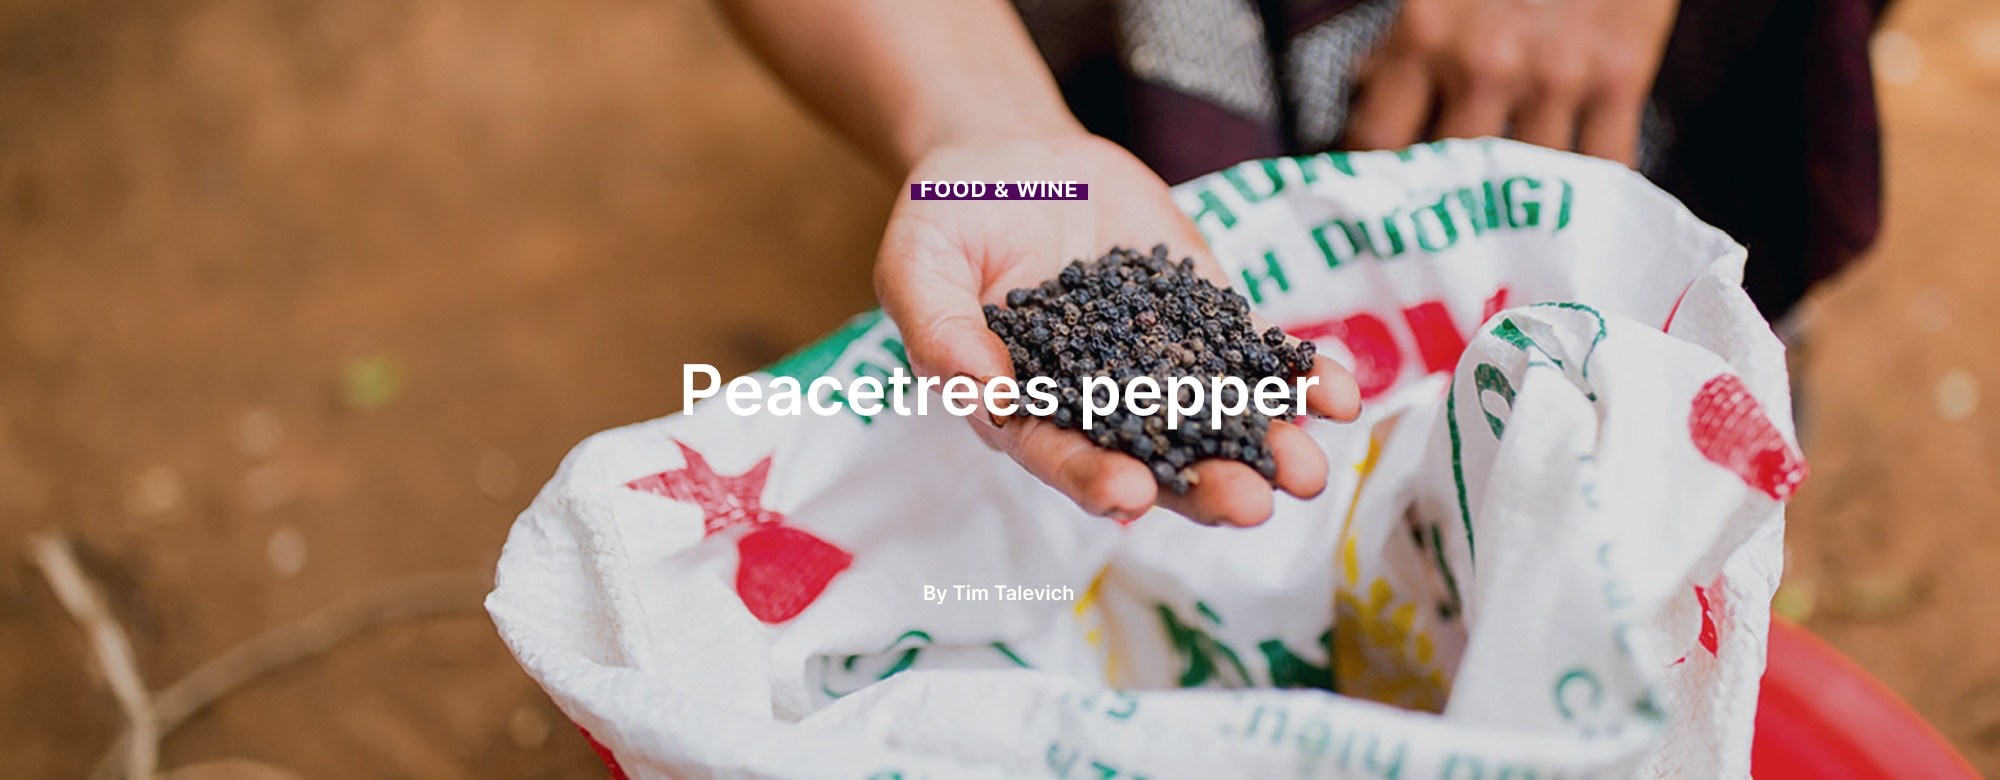 Peacetrees pepper